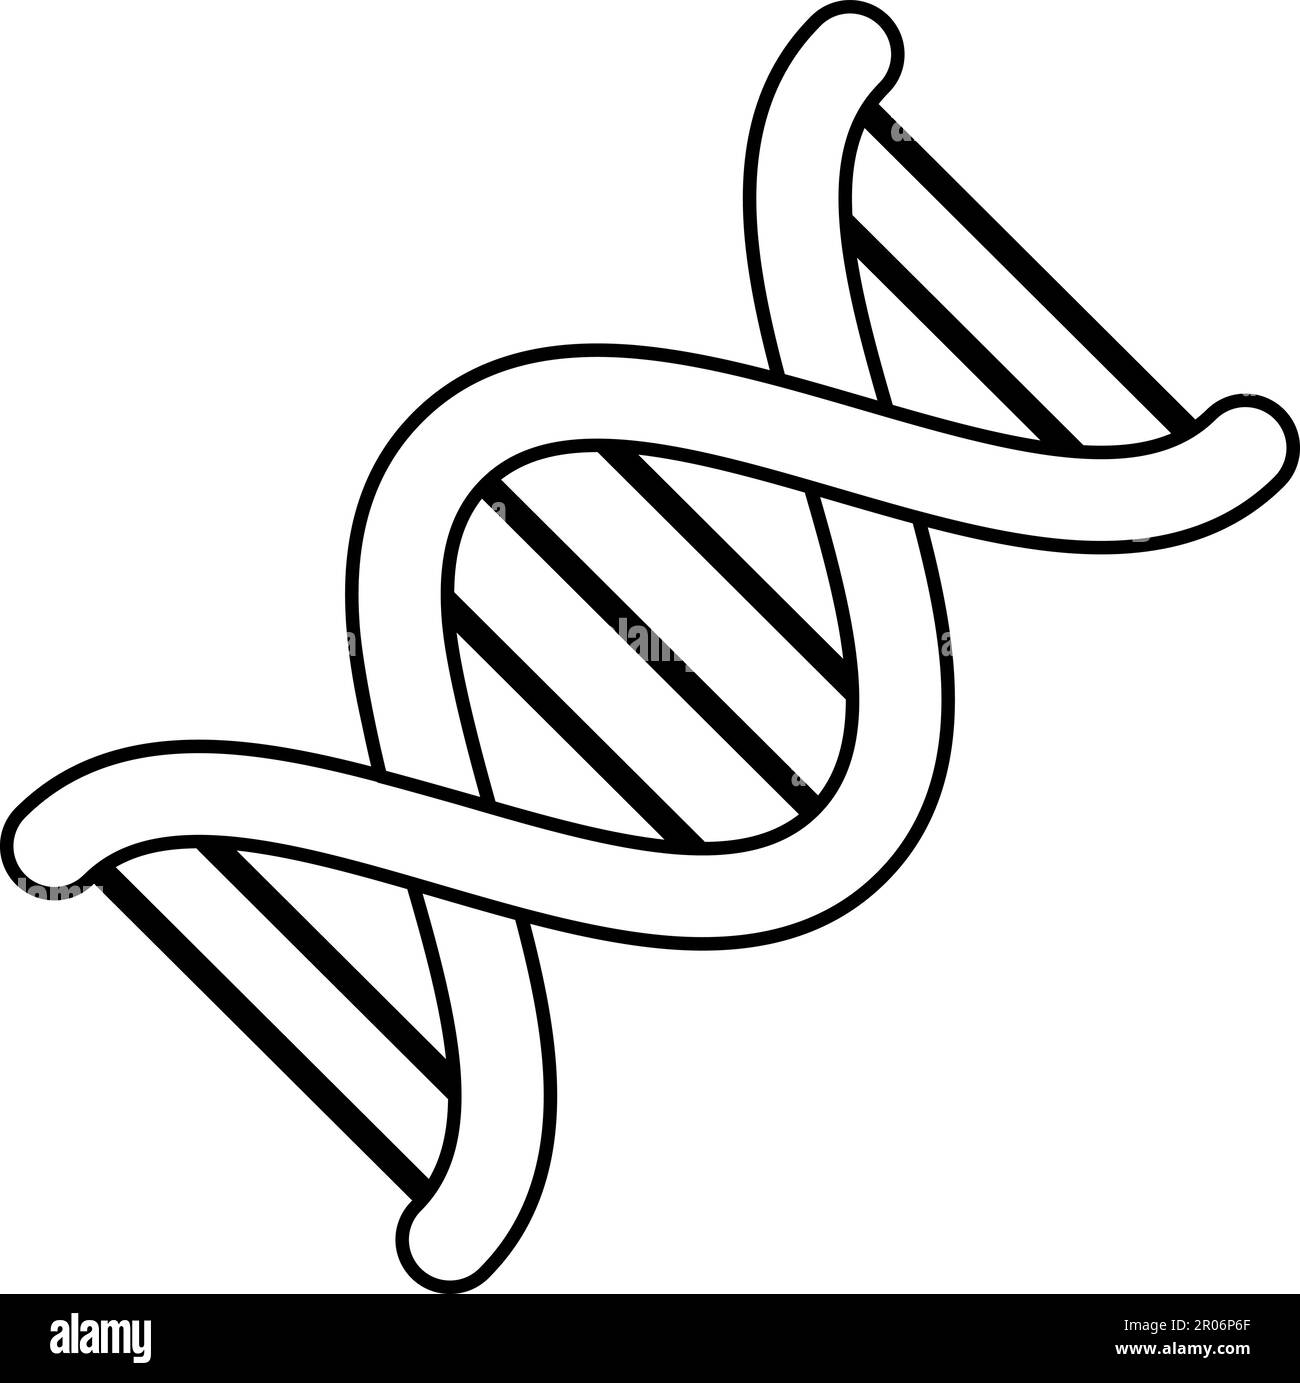 Simple DNA molecule connected chemical bond. Study of structure of cells and proteins in biological laboratory. Simple black liner vector icon isolate Stock Vector